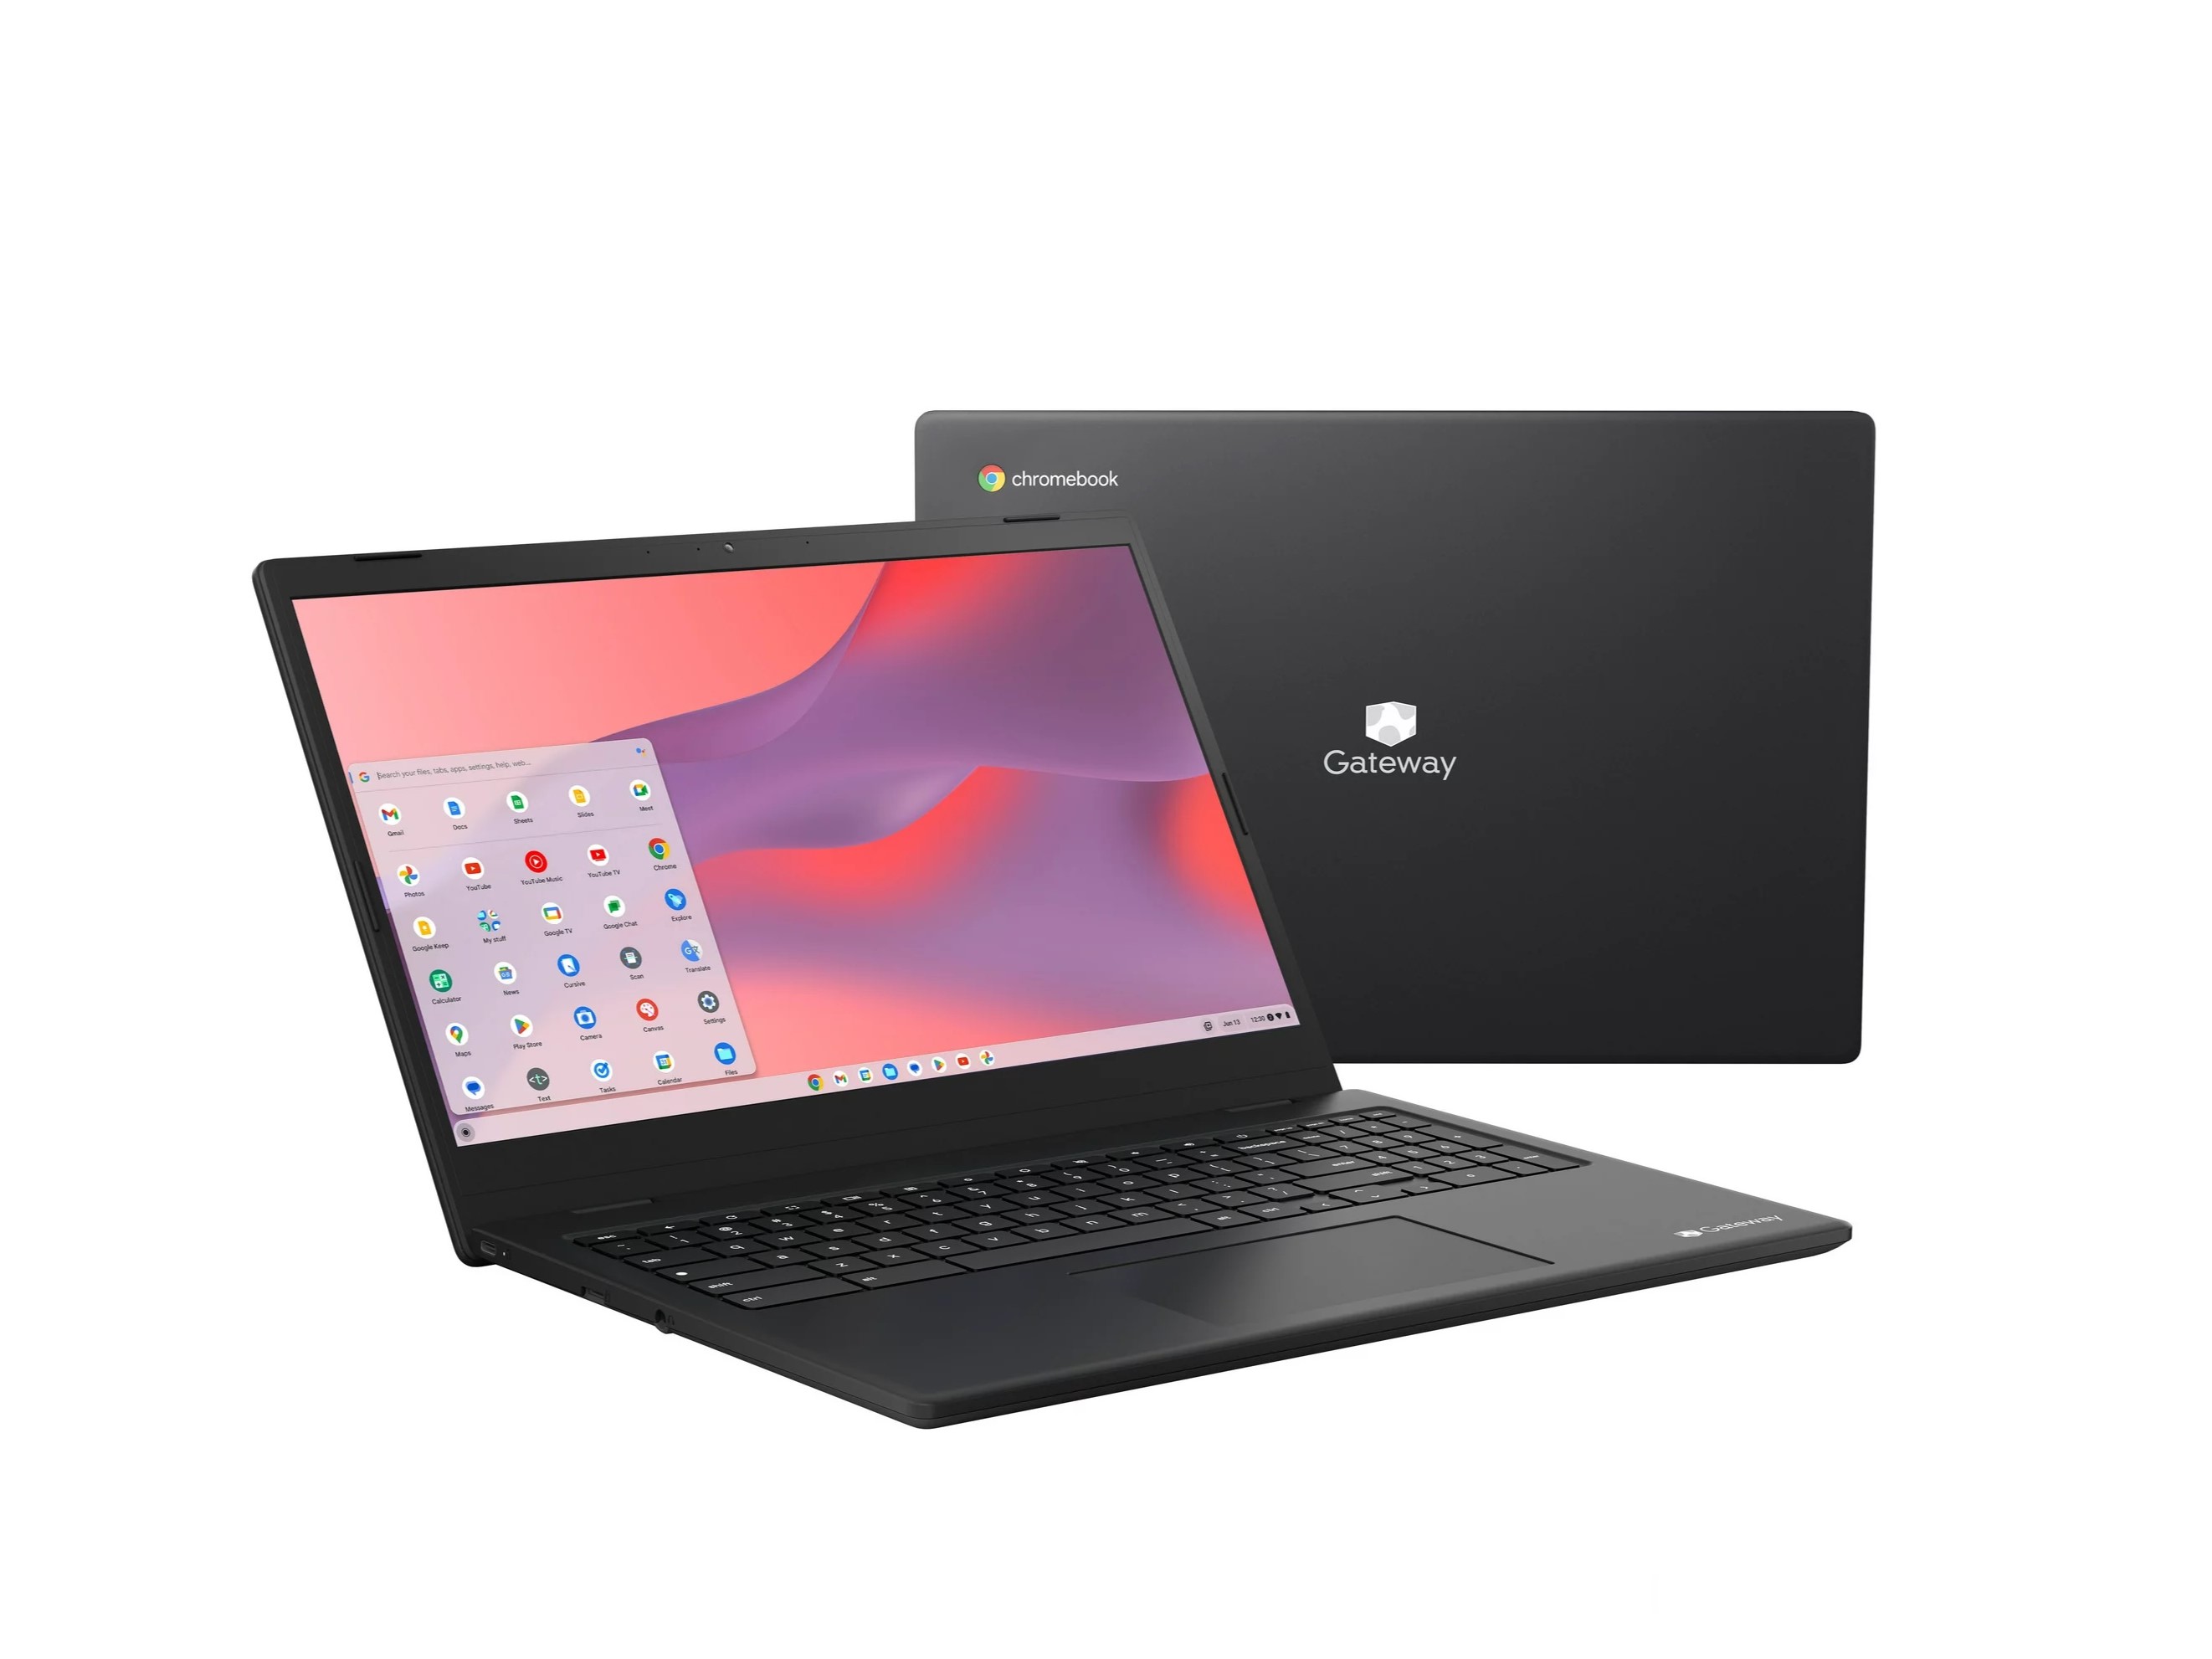 Gateway 15-inch chromebook in black product image.